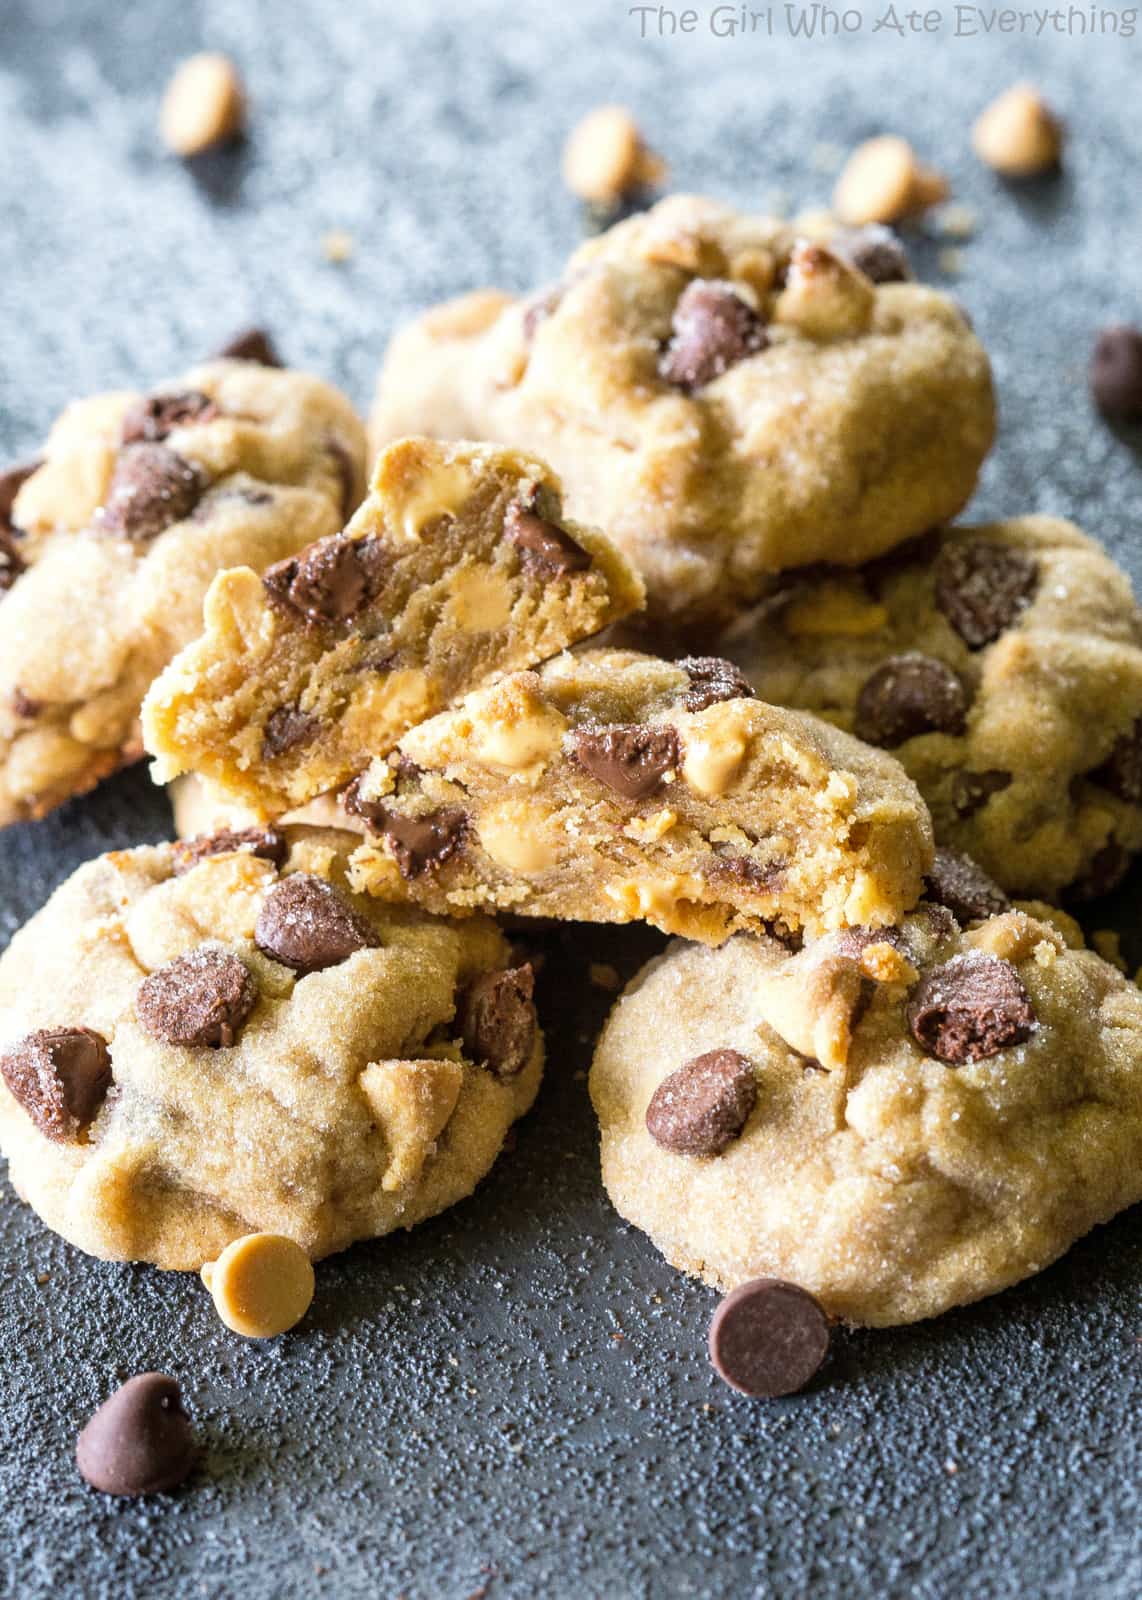 The Best Peanut Butter Cookies - studded with chocolate chips and peanut butter chips. the-girl-who-ate-everything.com